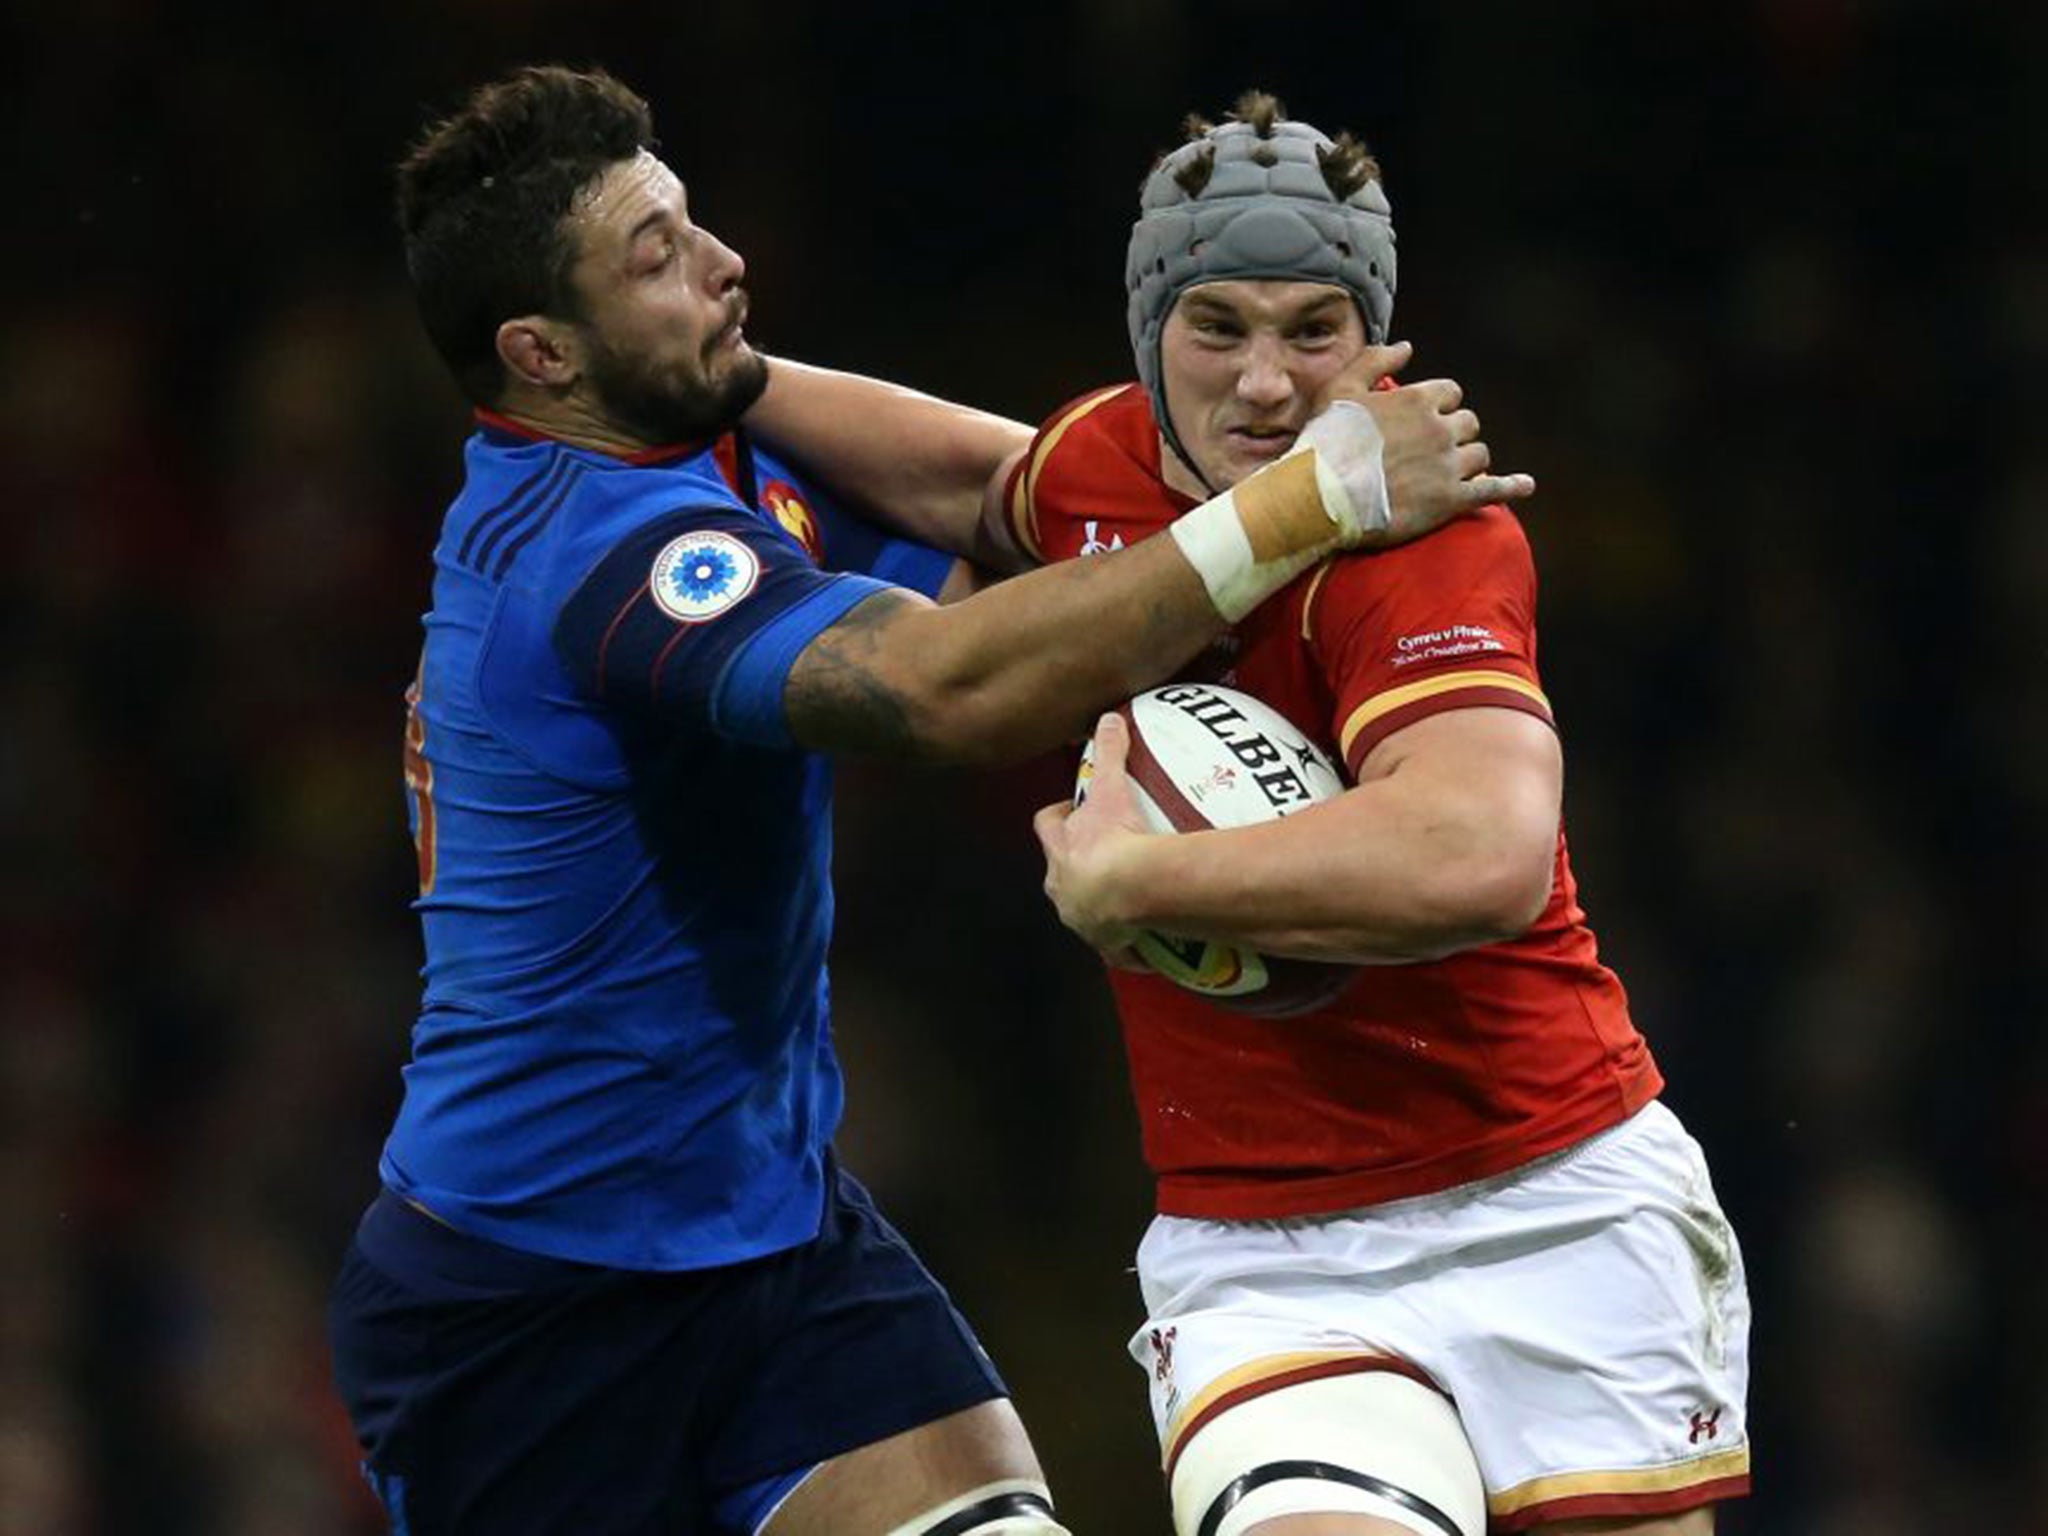 Jonathan Davies made Wales's try but there is more to come from the centre